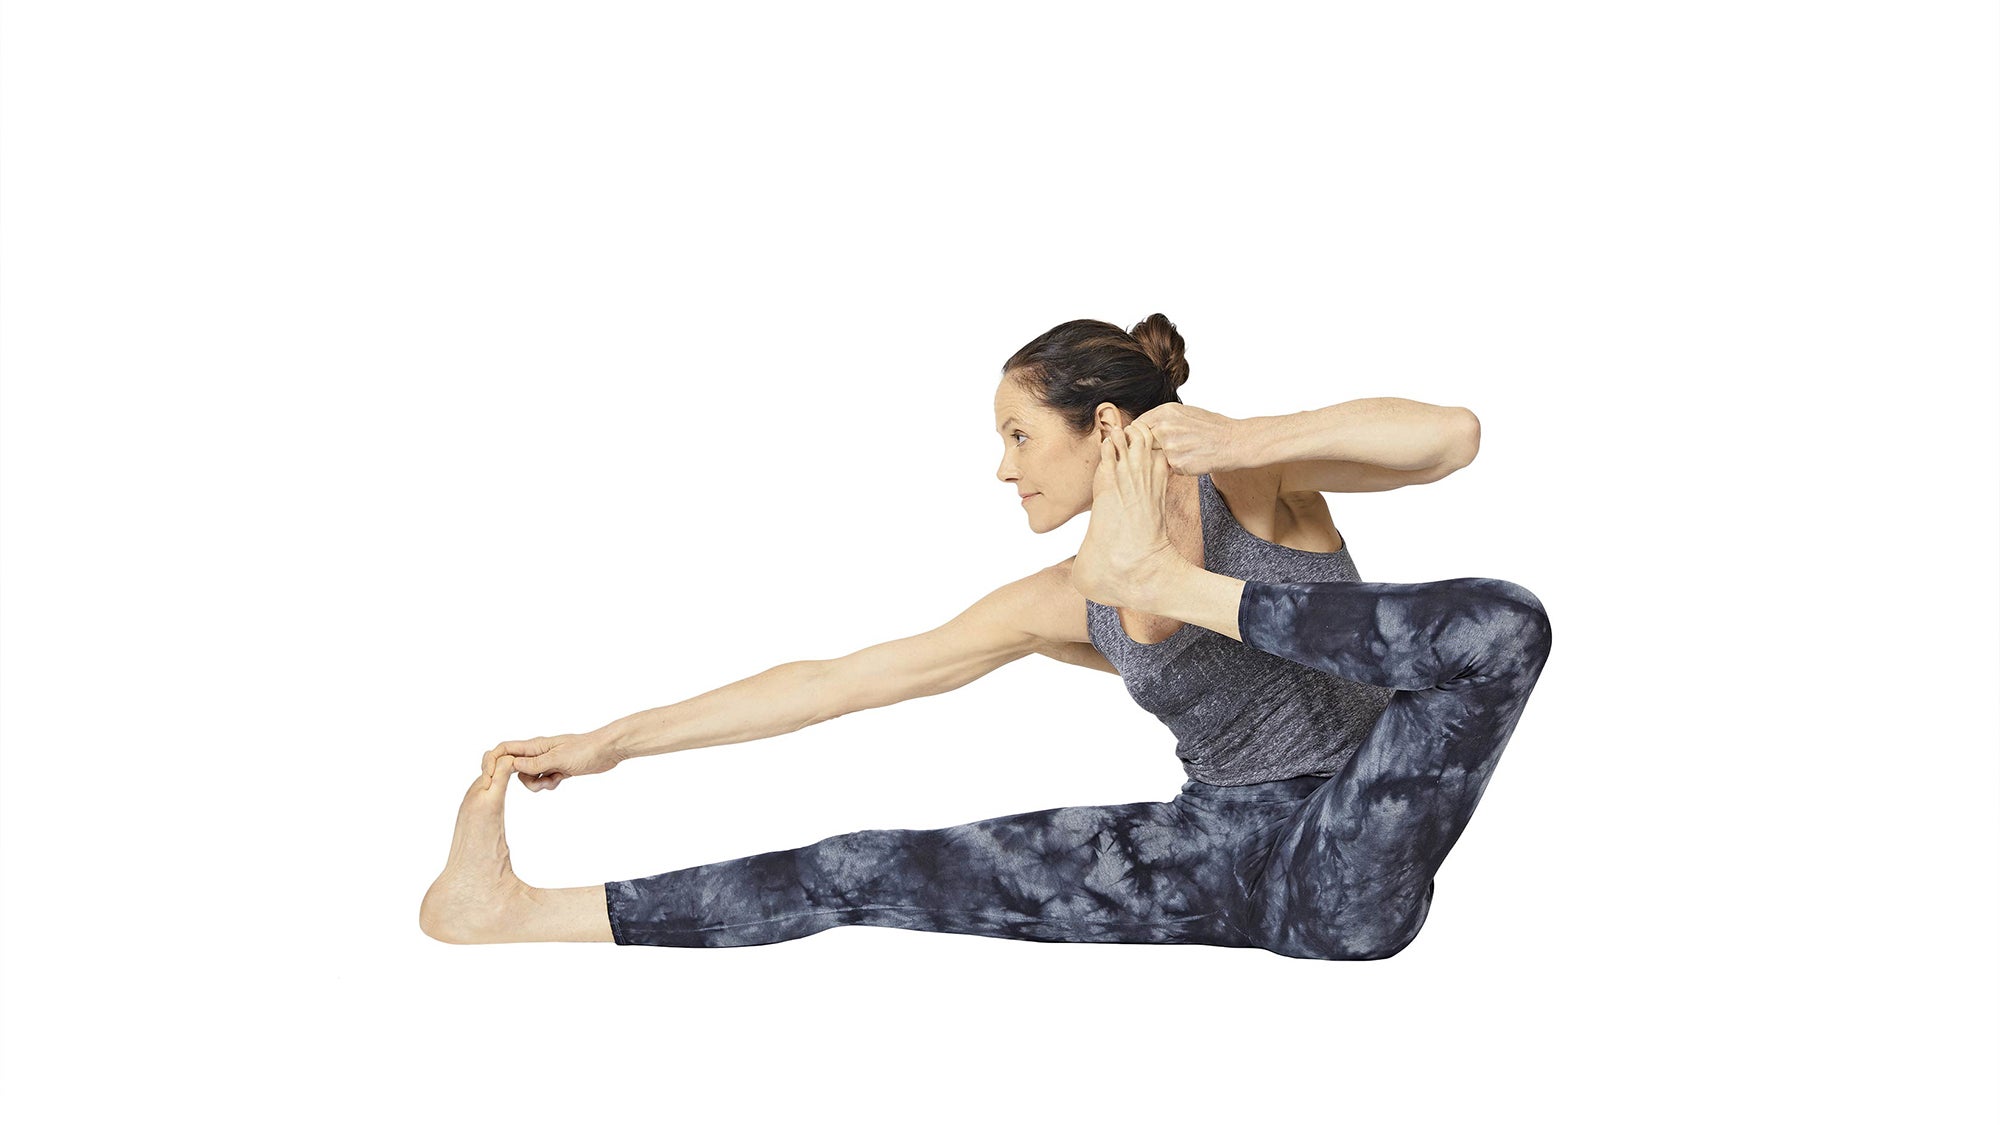 EkhartYoga - Bow Pose / Dhanurasana For variations, beginners tips, safety  points and more, browse through our pose library:  https://www.ekhartyoga.com/everything-yoga/yoga-poses/bow-pose | Facebook